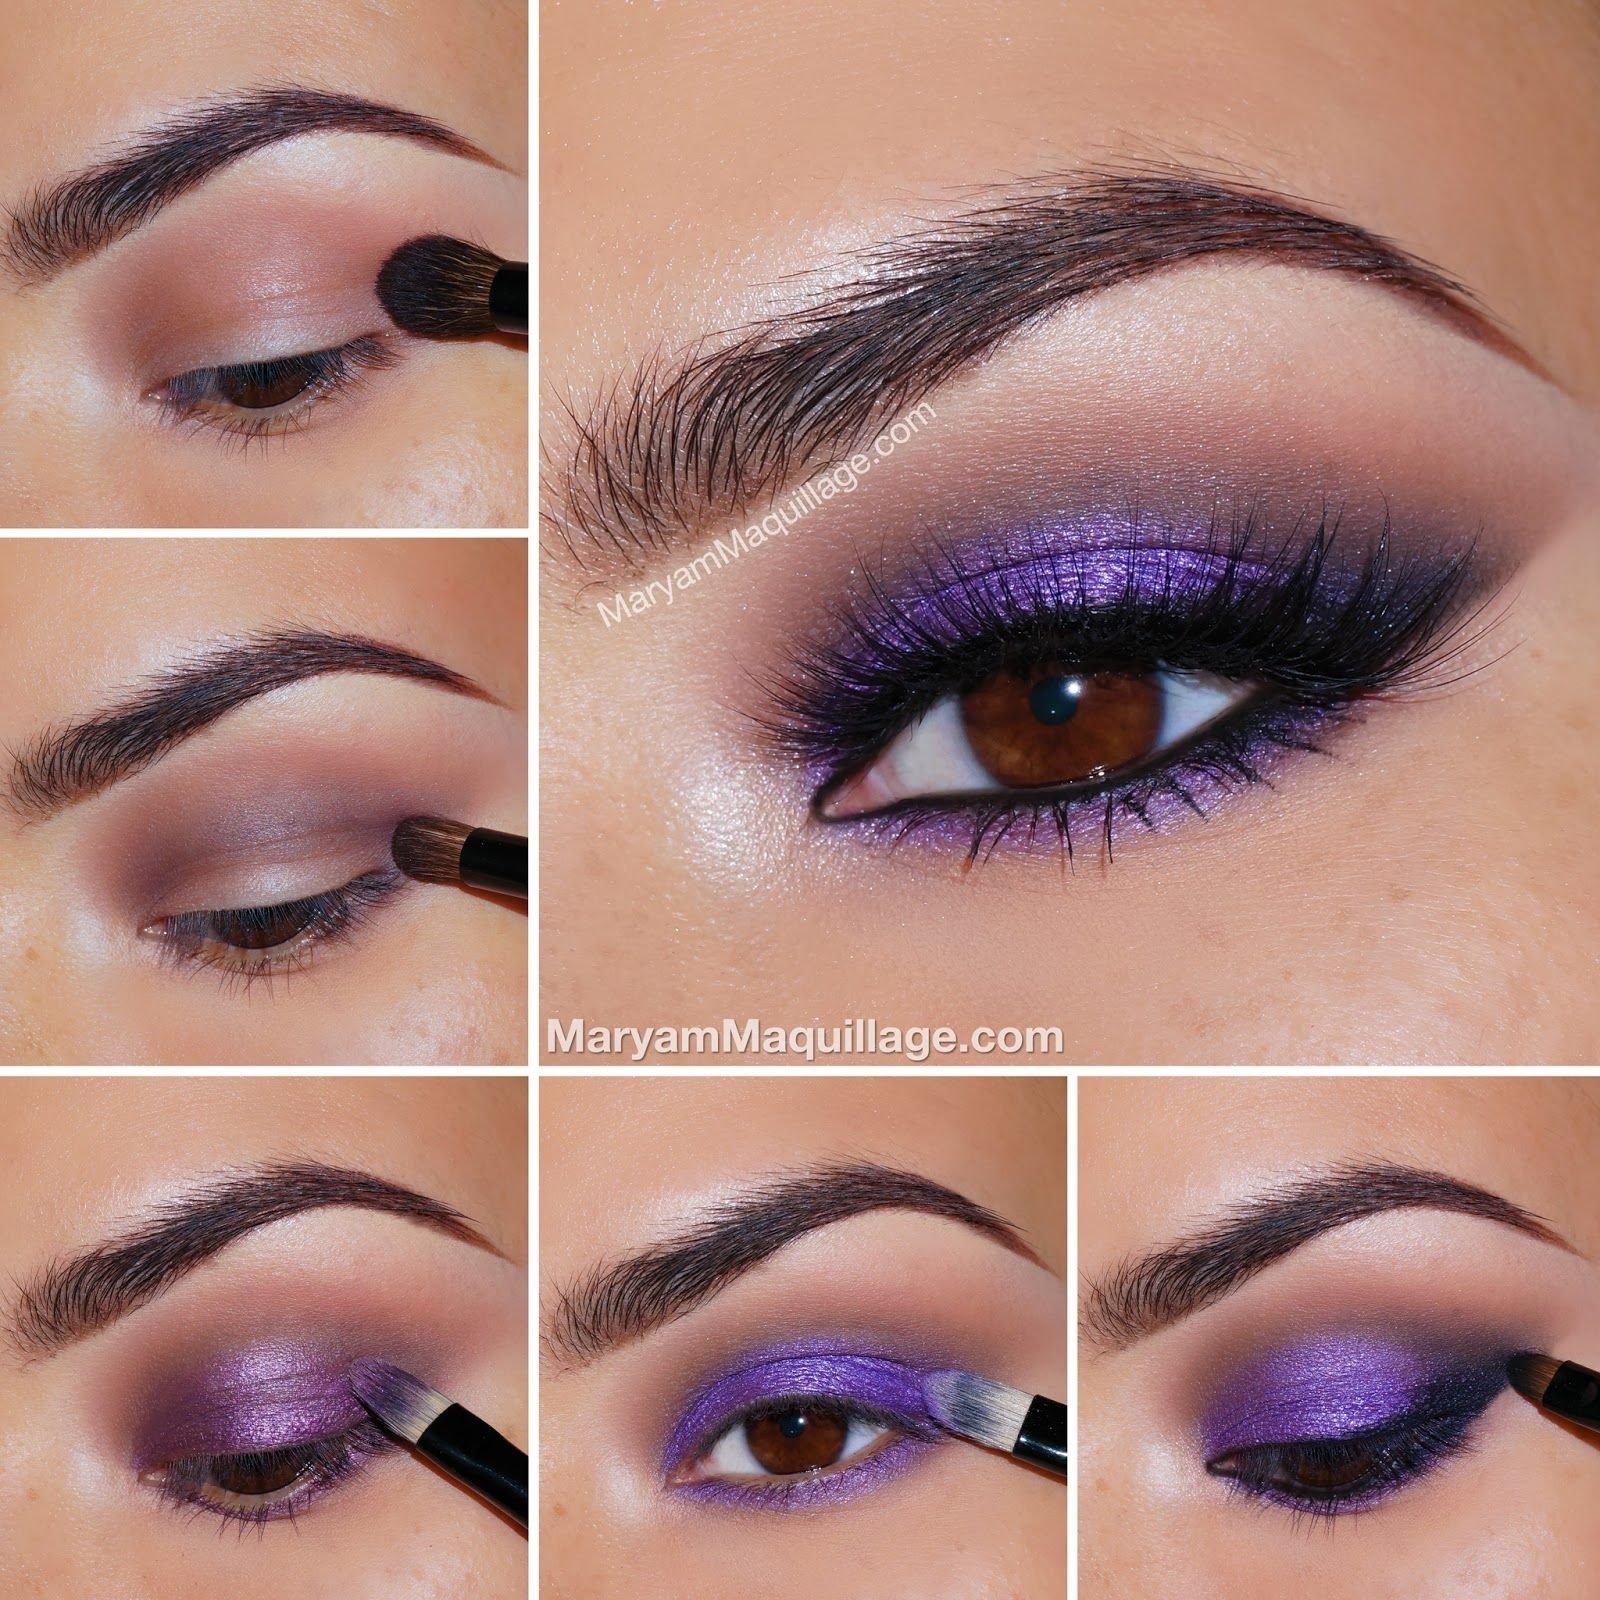 10 Trendy Make Up Ideas For Brown Eyes 5 eyeshadow looks perfect for brown eyed girls bold colors brown 2022